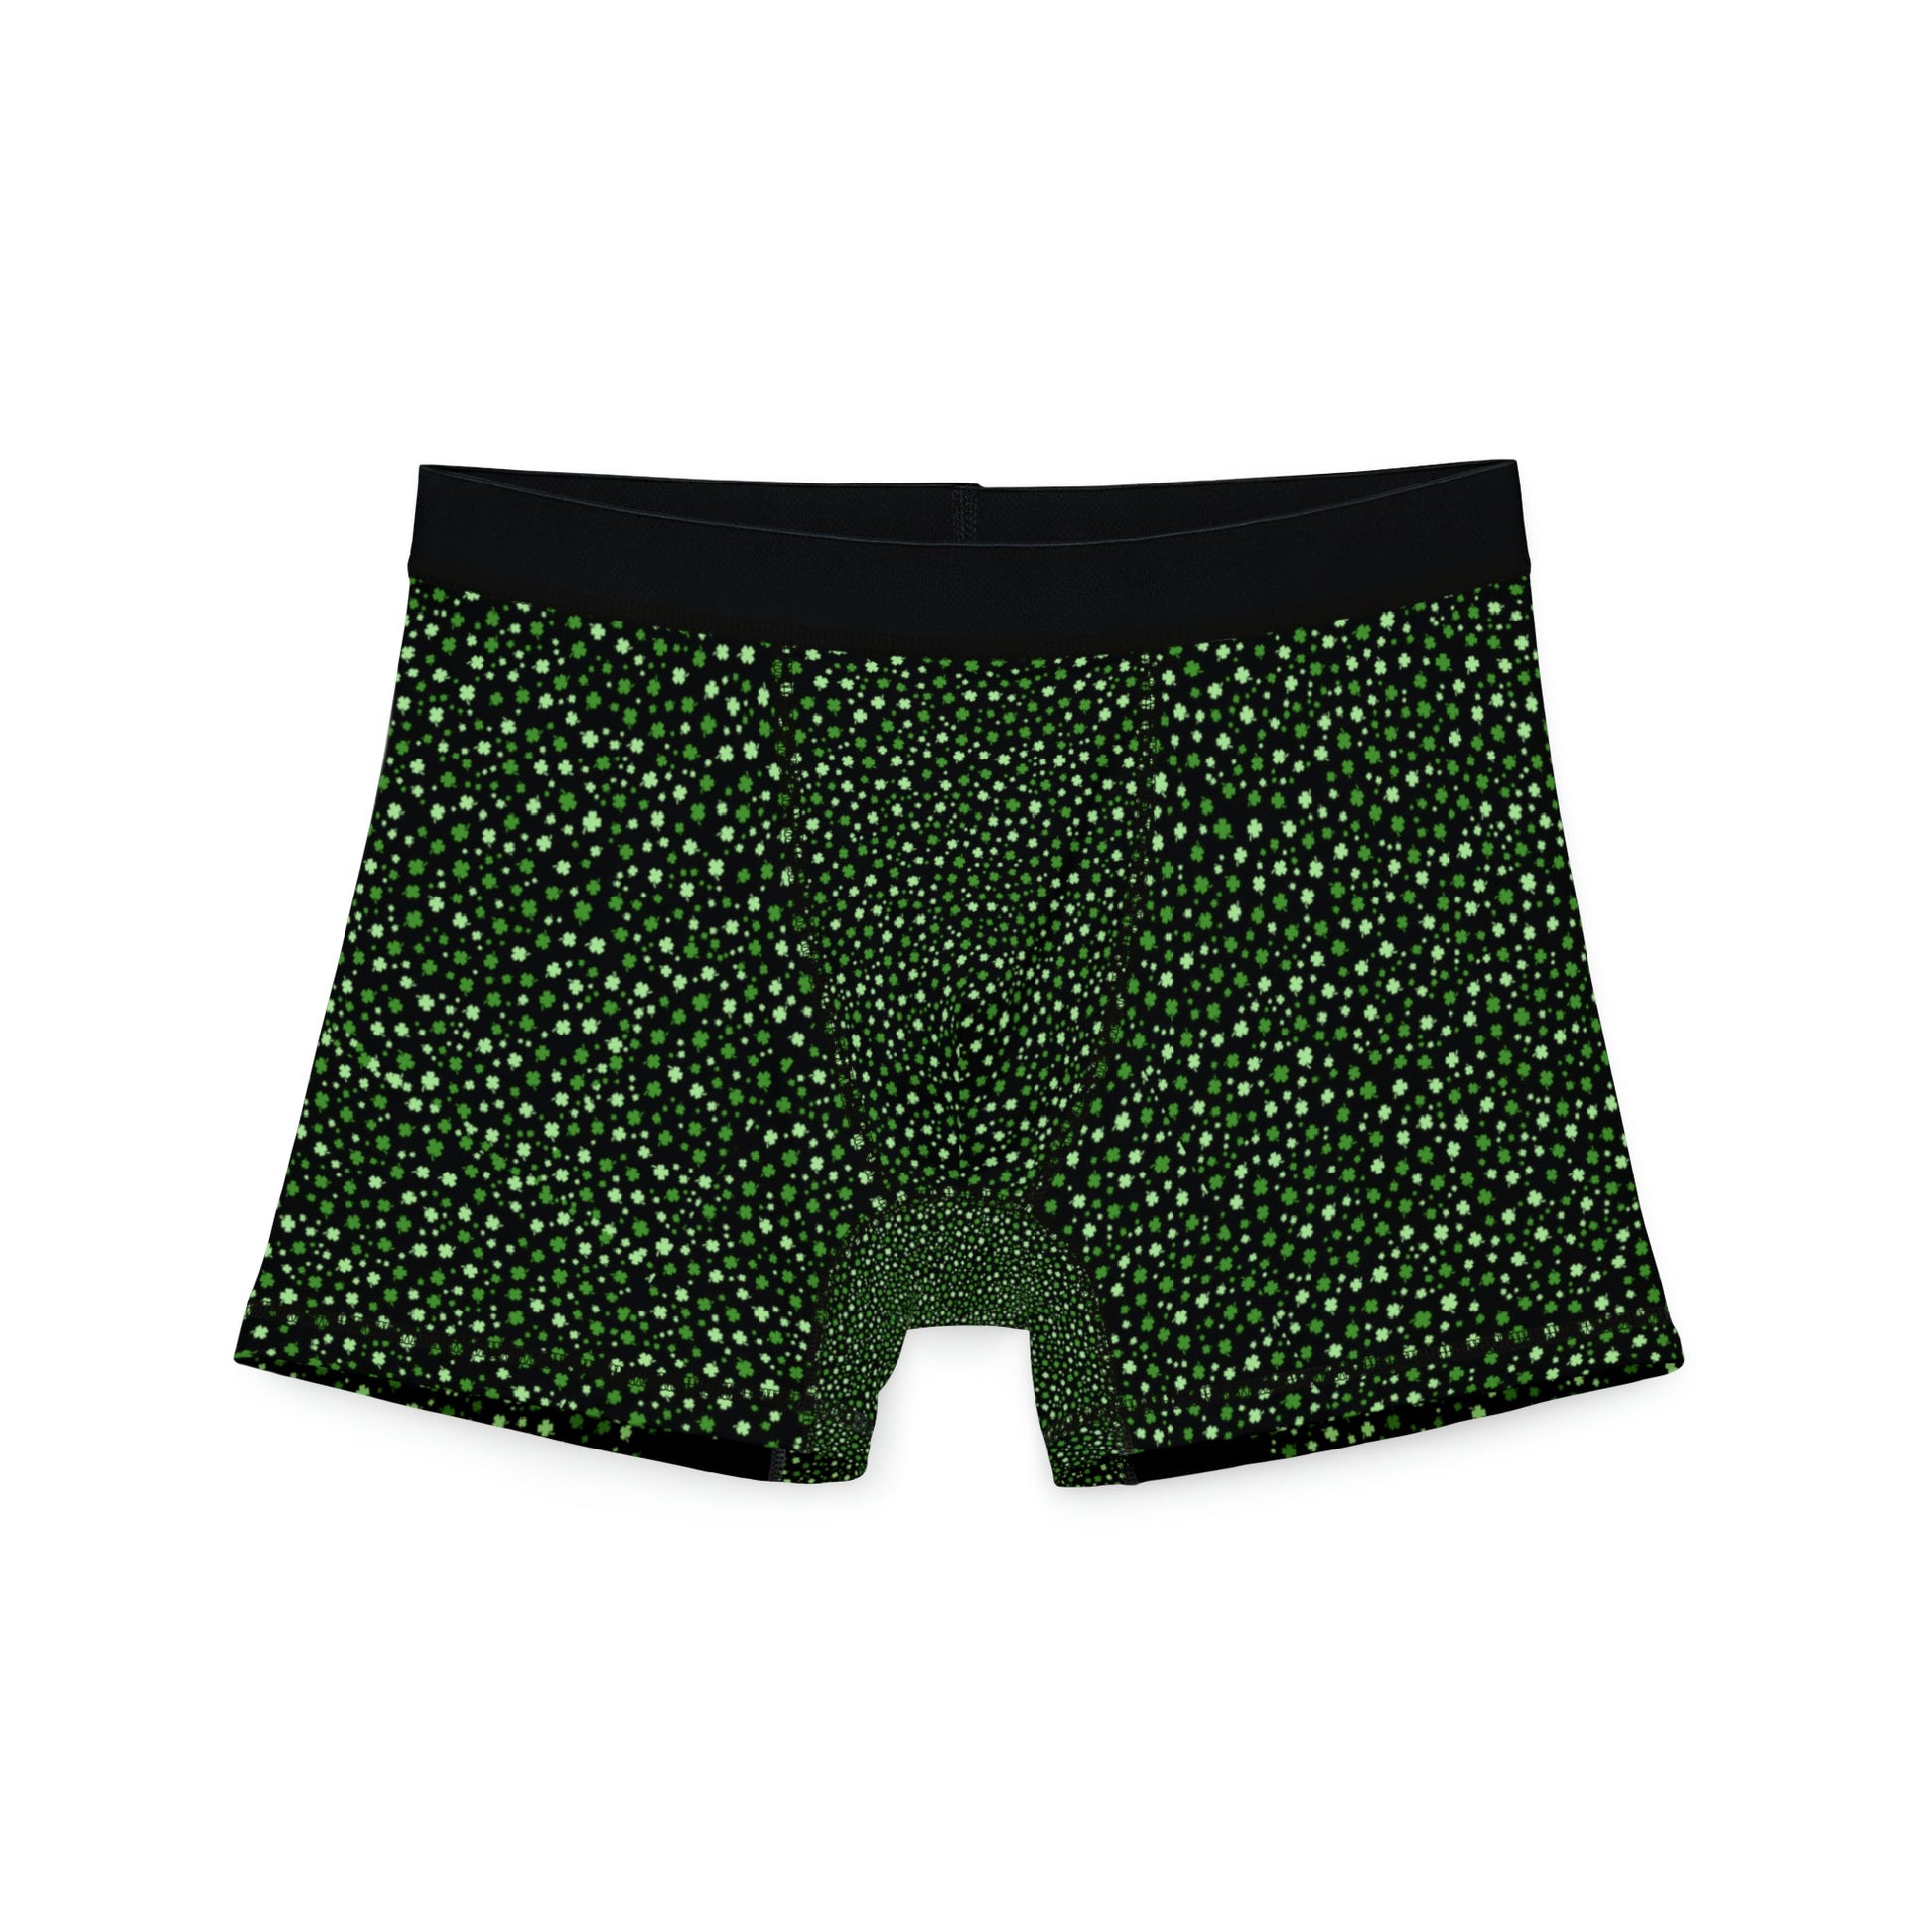 My Lucky Boxers - All Over Prints